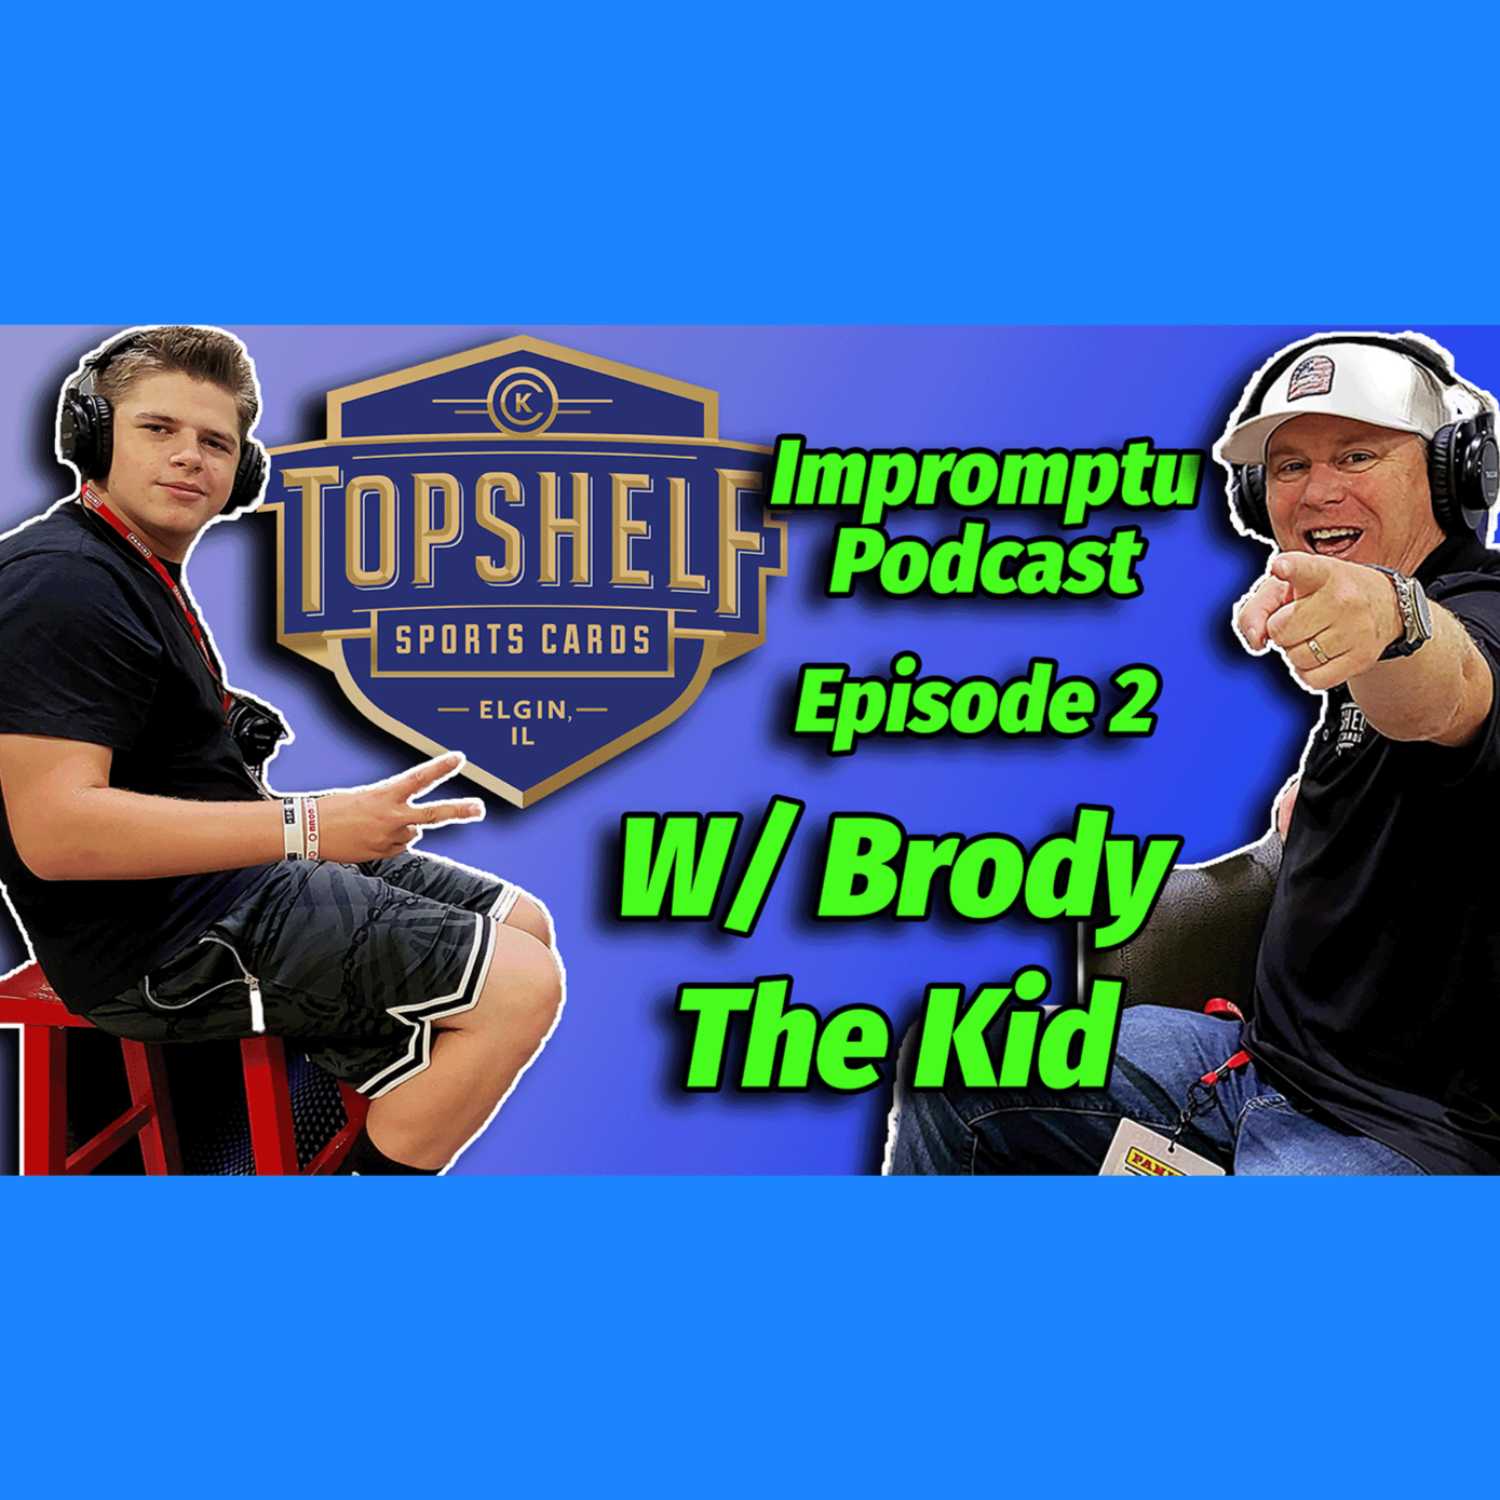 Top Shelf Sports Cards Impromptu Podcast: With Brody the Kid